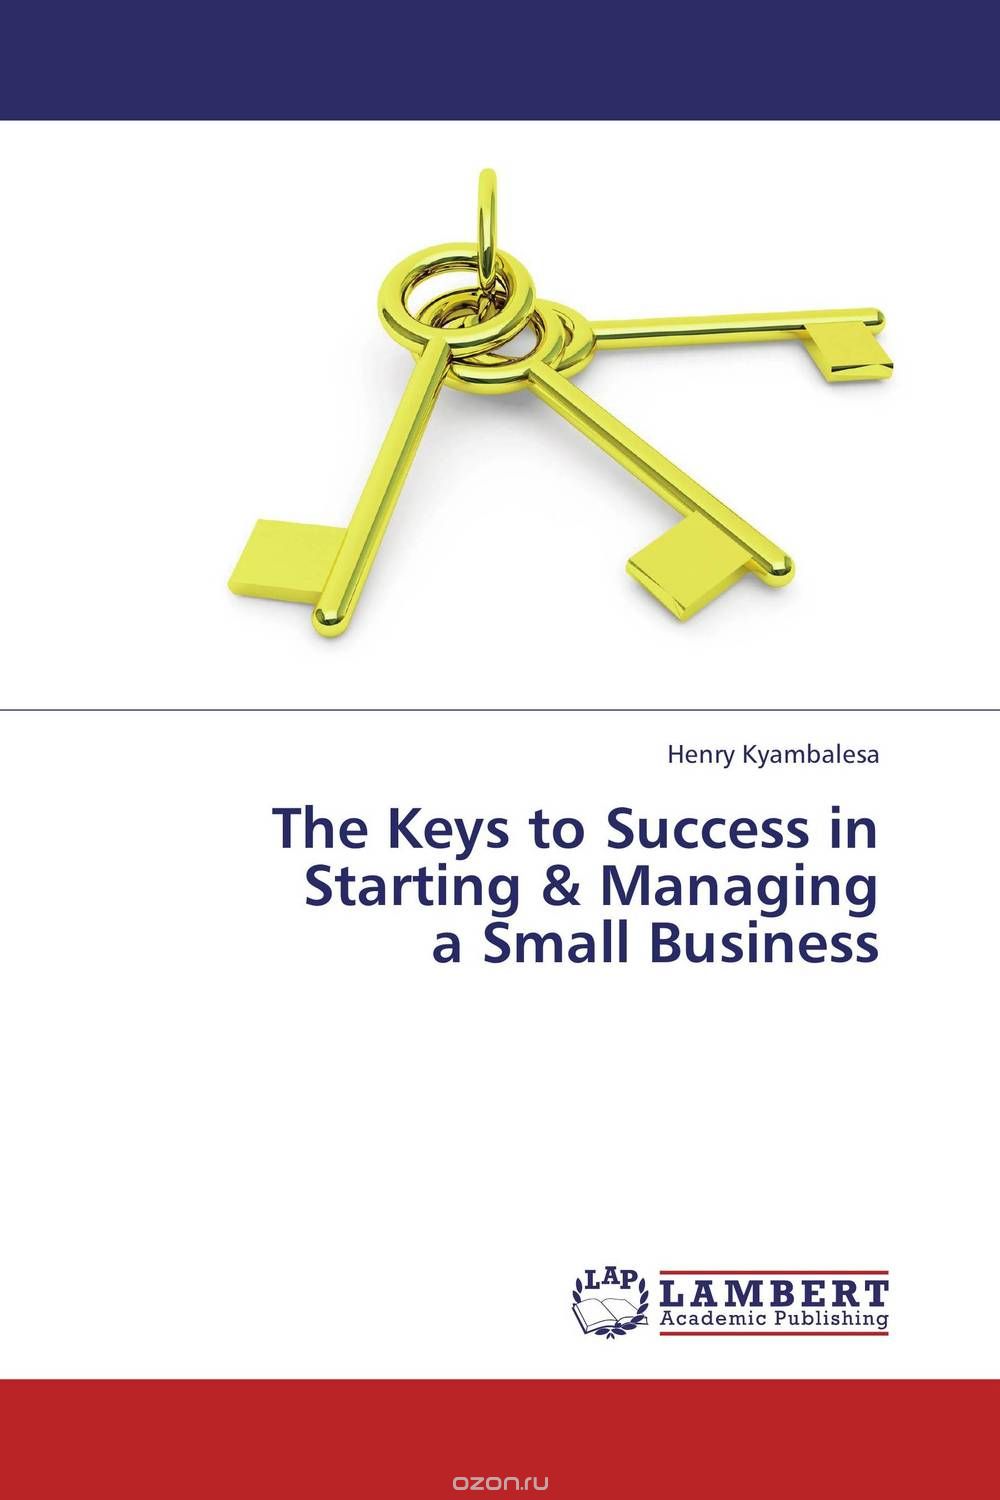 Скачать книгу "The Keys to Success in Starting & Managing  a Small Business"